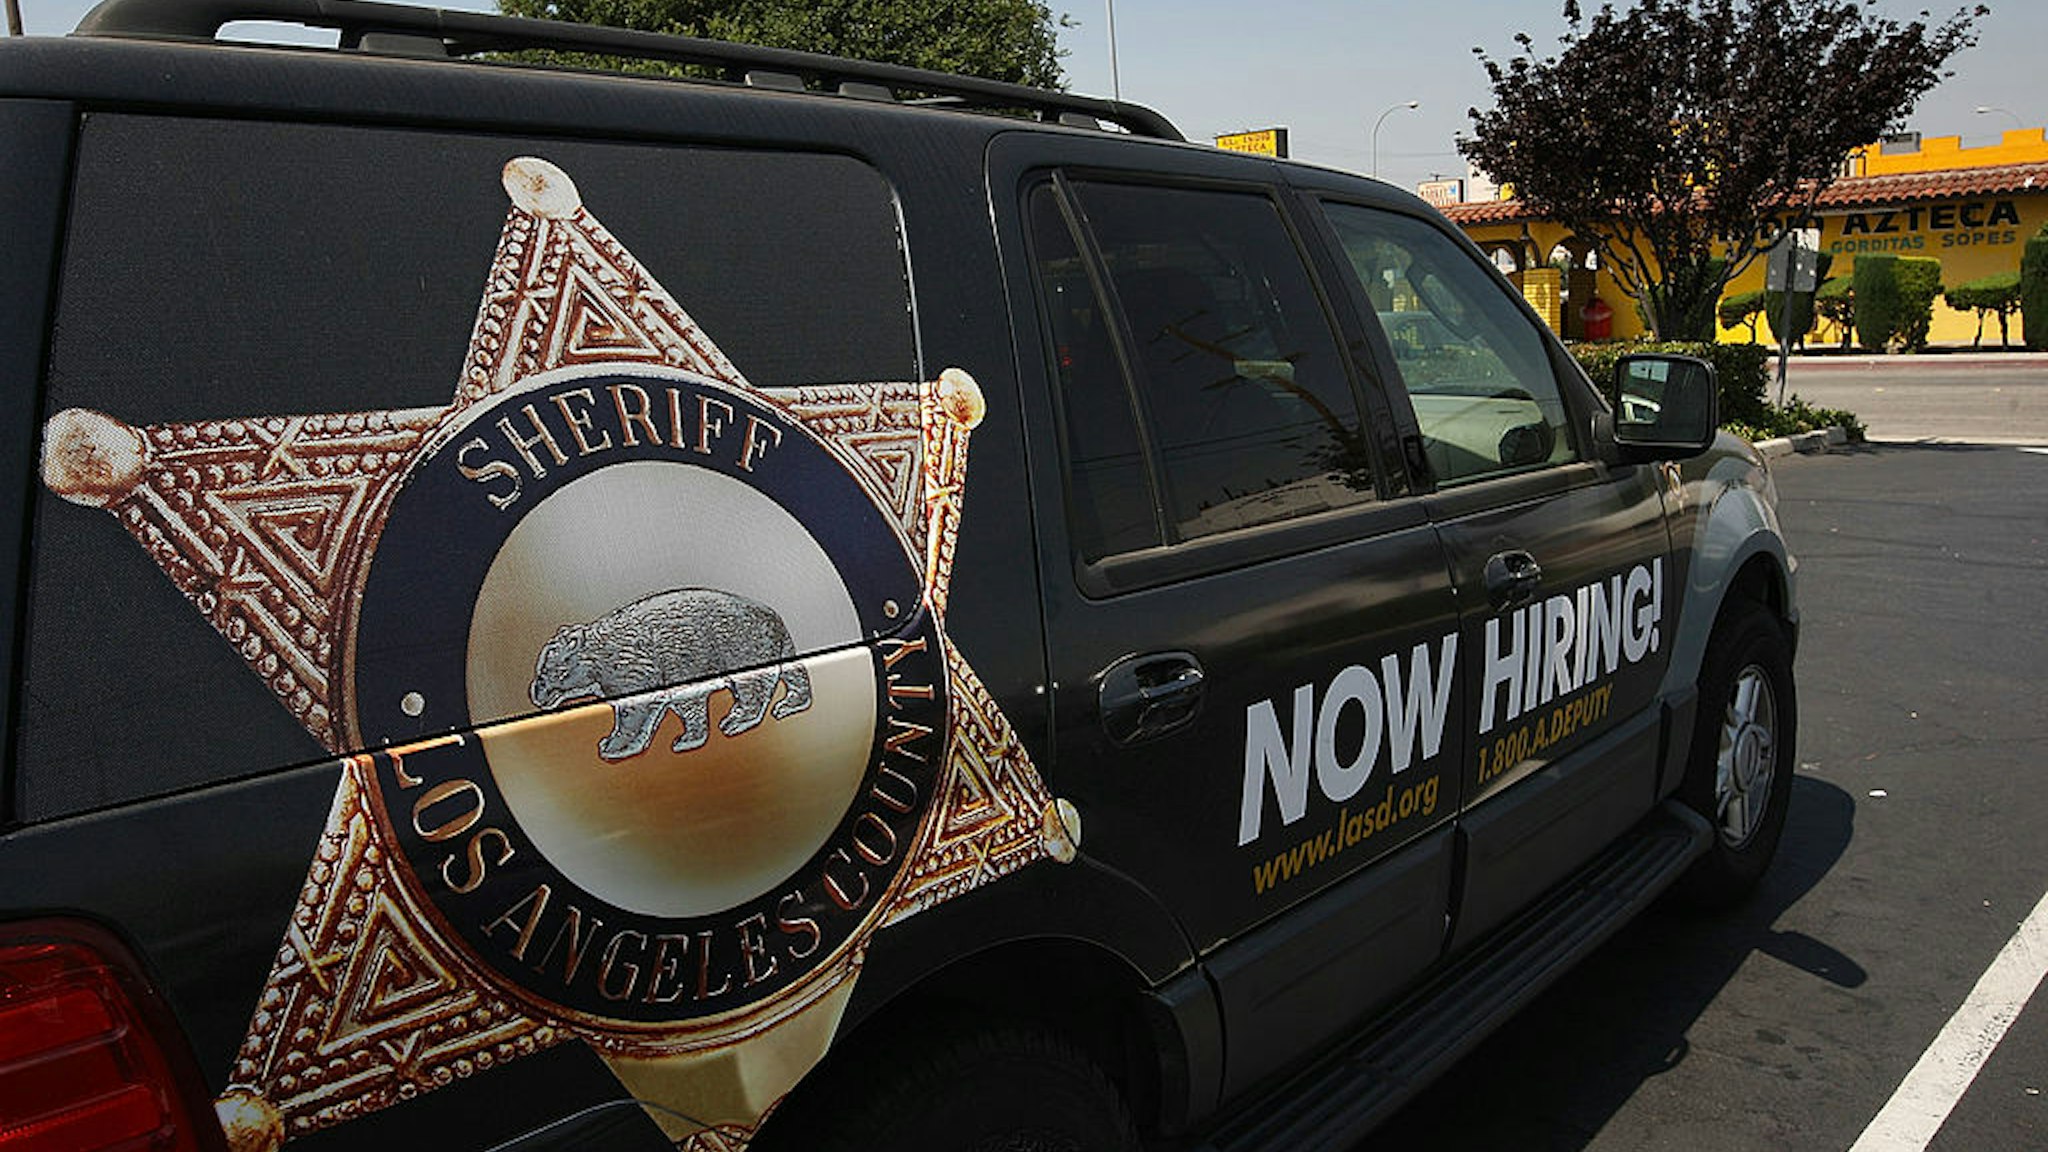 MAYWOOD, CA - JUNE 23: Los Angeles County sheriffs vehicle that advertises for recruits is parked in the parking lot of the Maywood police department as sheriffs deputies make plans to take over the facility on June 23, 2010 in Maywood, California. Facing a $450,000 budget deficit, the Maywood City Council approved the most drastic action yet of any California city to wrest control of its fiscal crisis by firing all its employees, disbanding its police department and contracting out its entire municipal operations to a neighboring city. County sheriffs will replace Maywood police officers but council members will remain on the payroll to set policy. (Photo by David McNew/Getty Images)